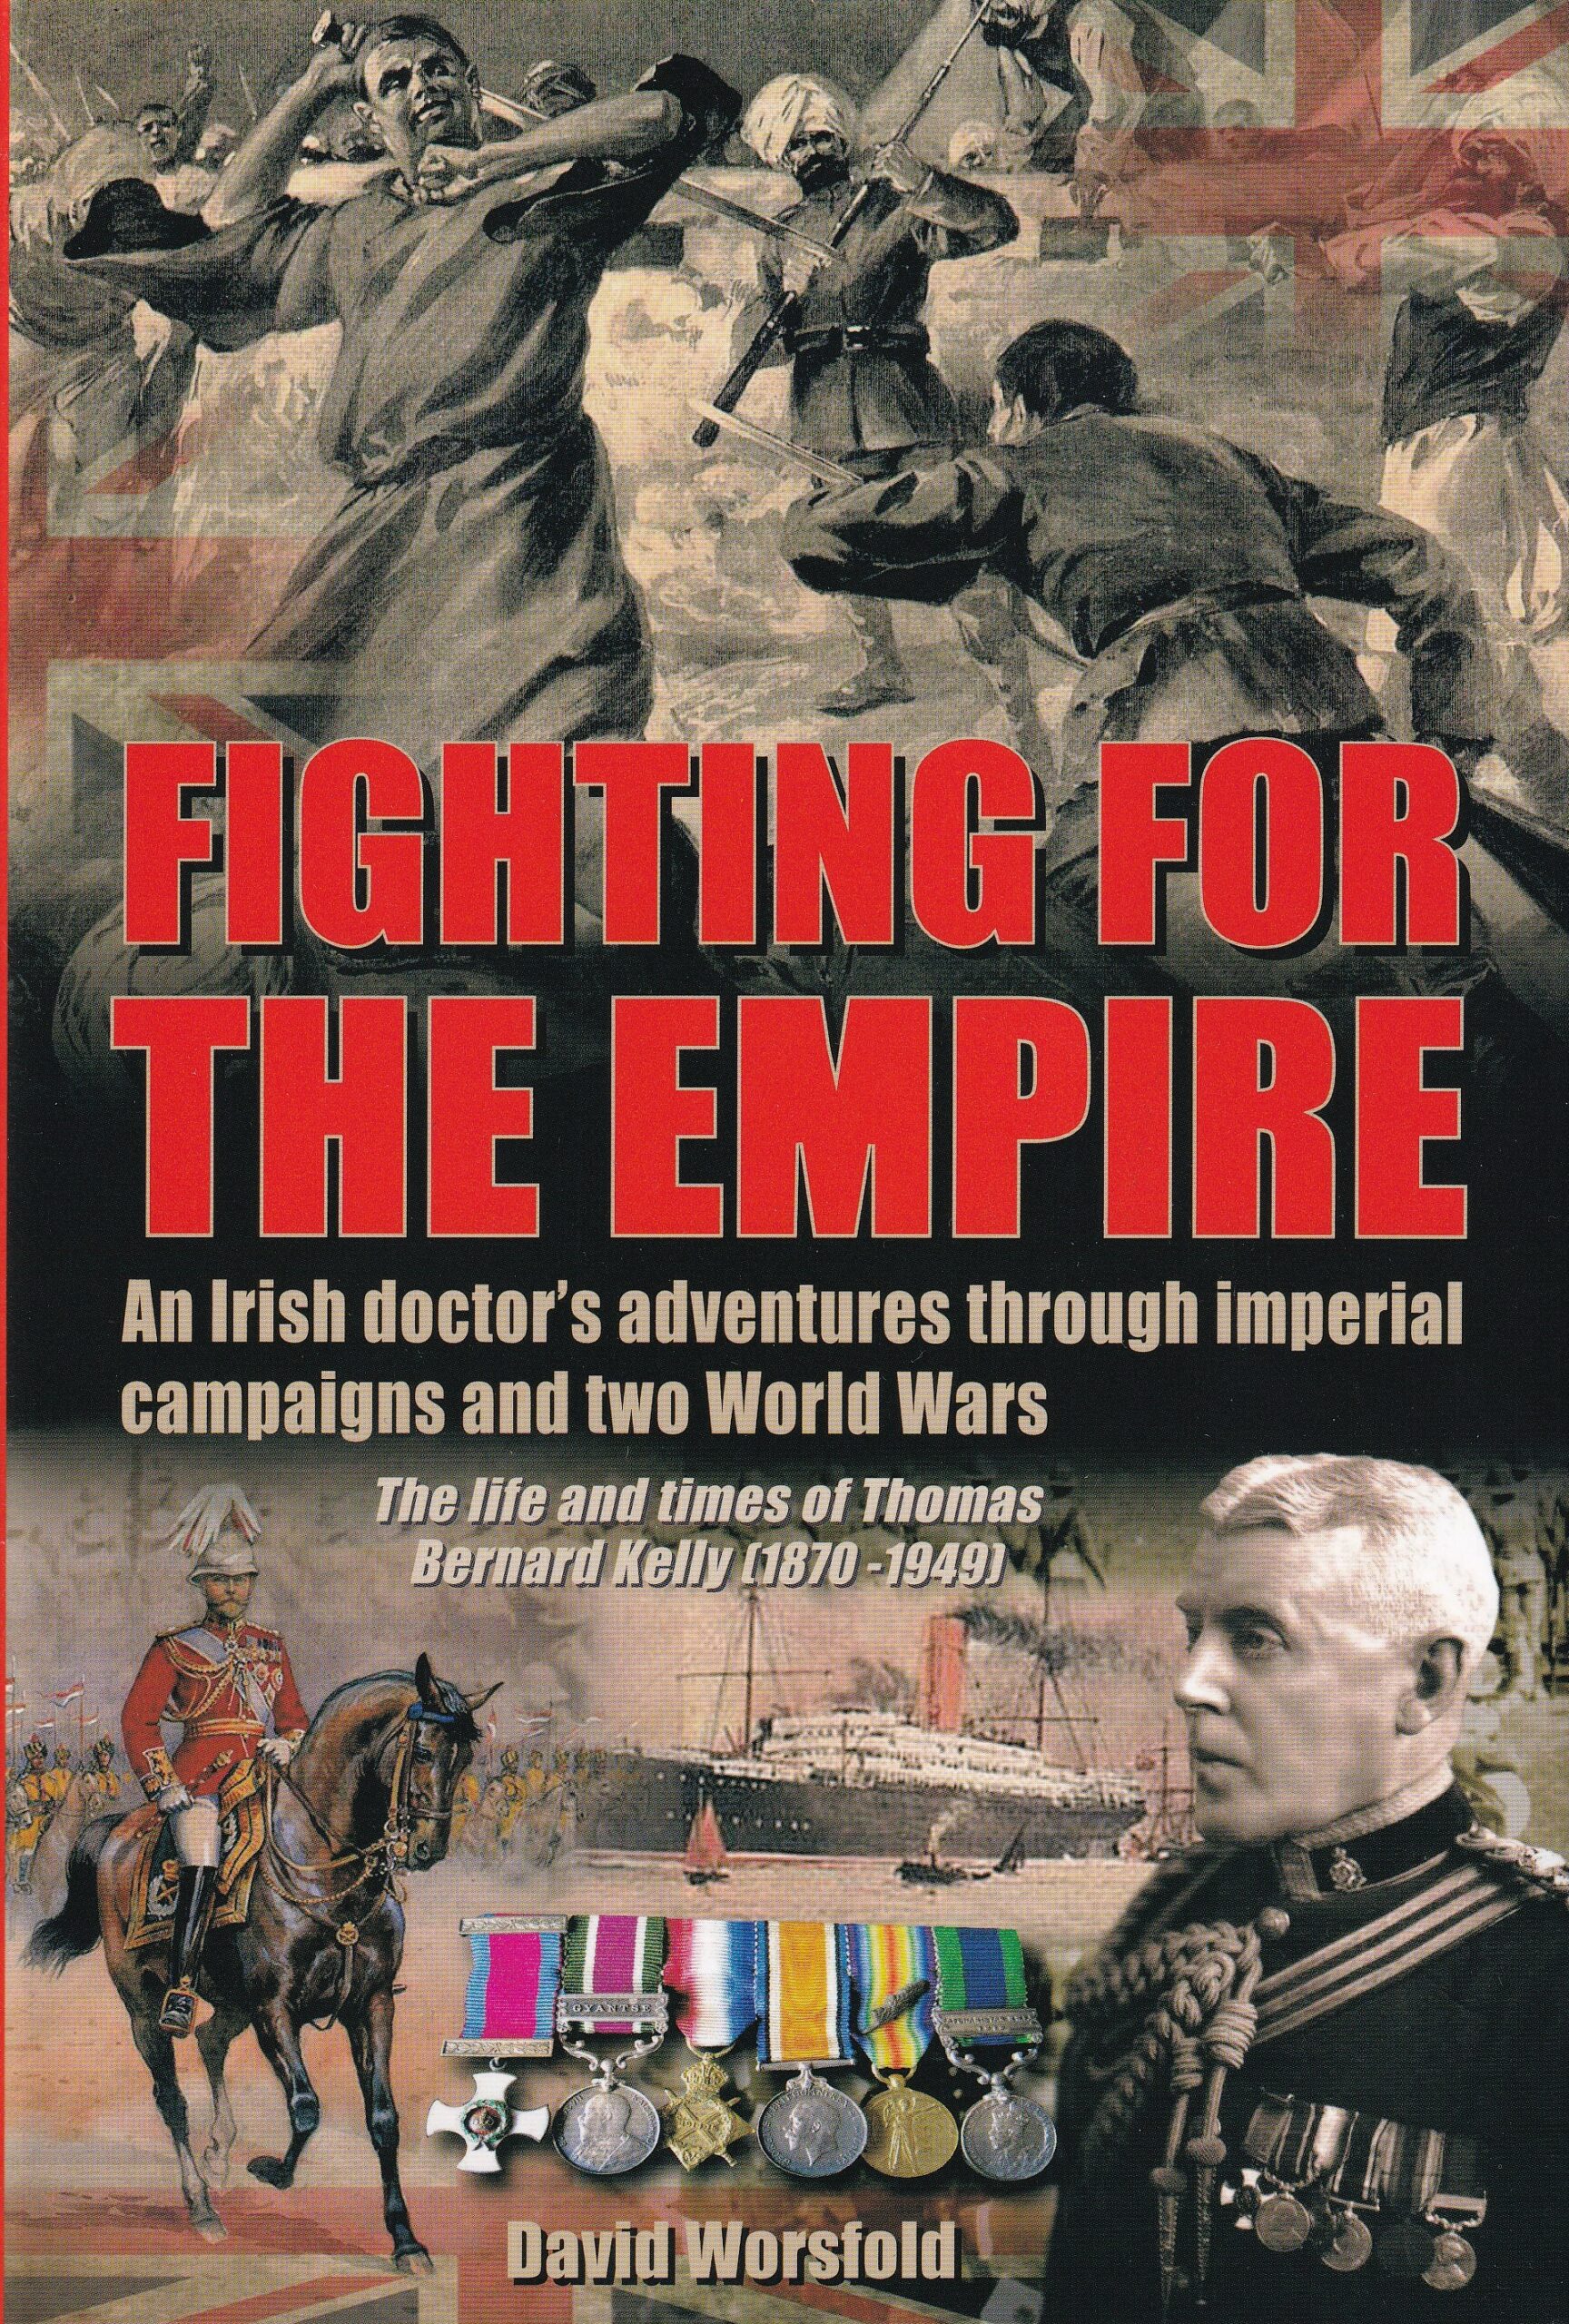 Fighting for the Empire: An Irish doctor’s adventures through imperial campaigns and two World Wars | David Worsfold | Charlie Byrne's